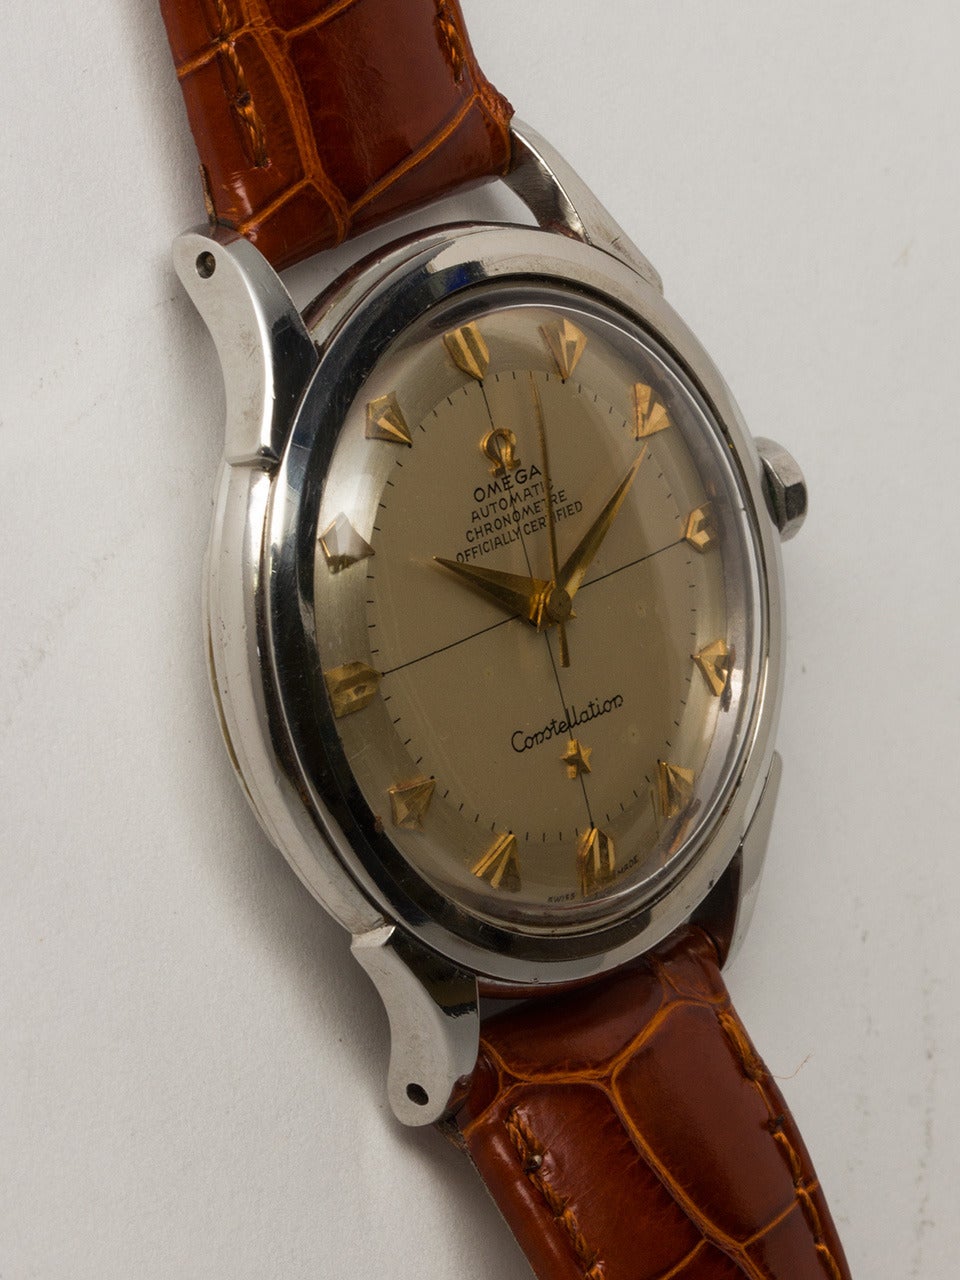 Omega Stainless Steel Constellation Wristwatch circa 1960s. Case measuring 35 x 42mm with screw back case with Observatory logo and original Constellation crown. Very clean and desirable example with beautiful condition original pie pan dial with